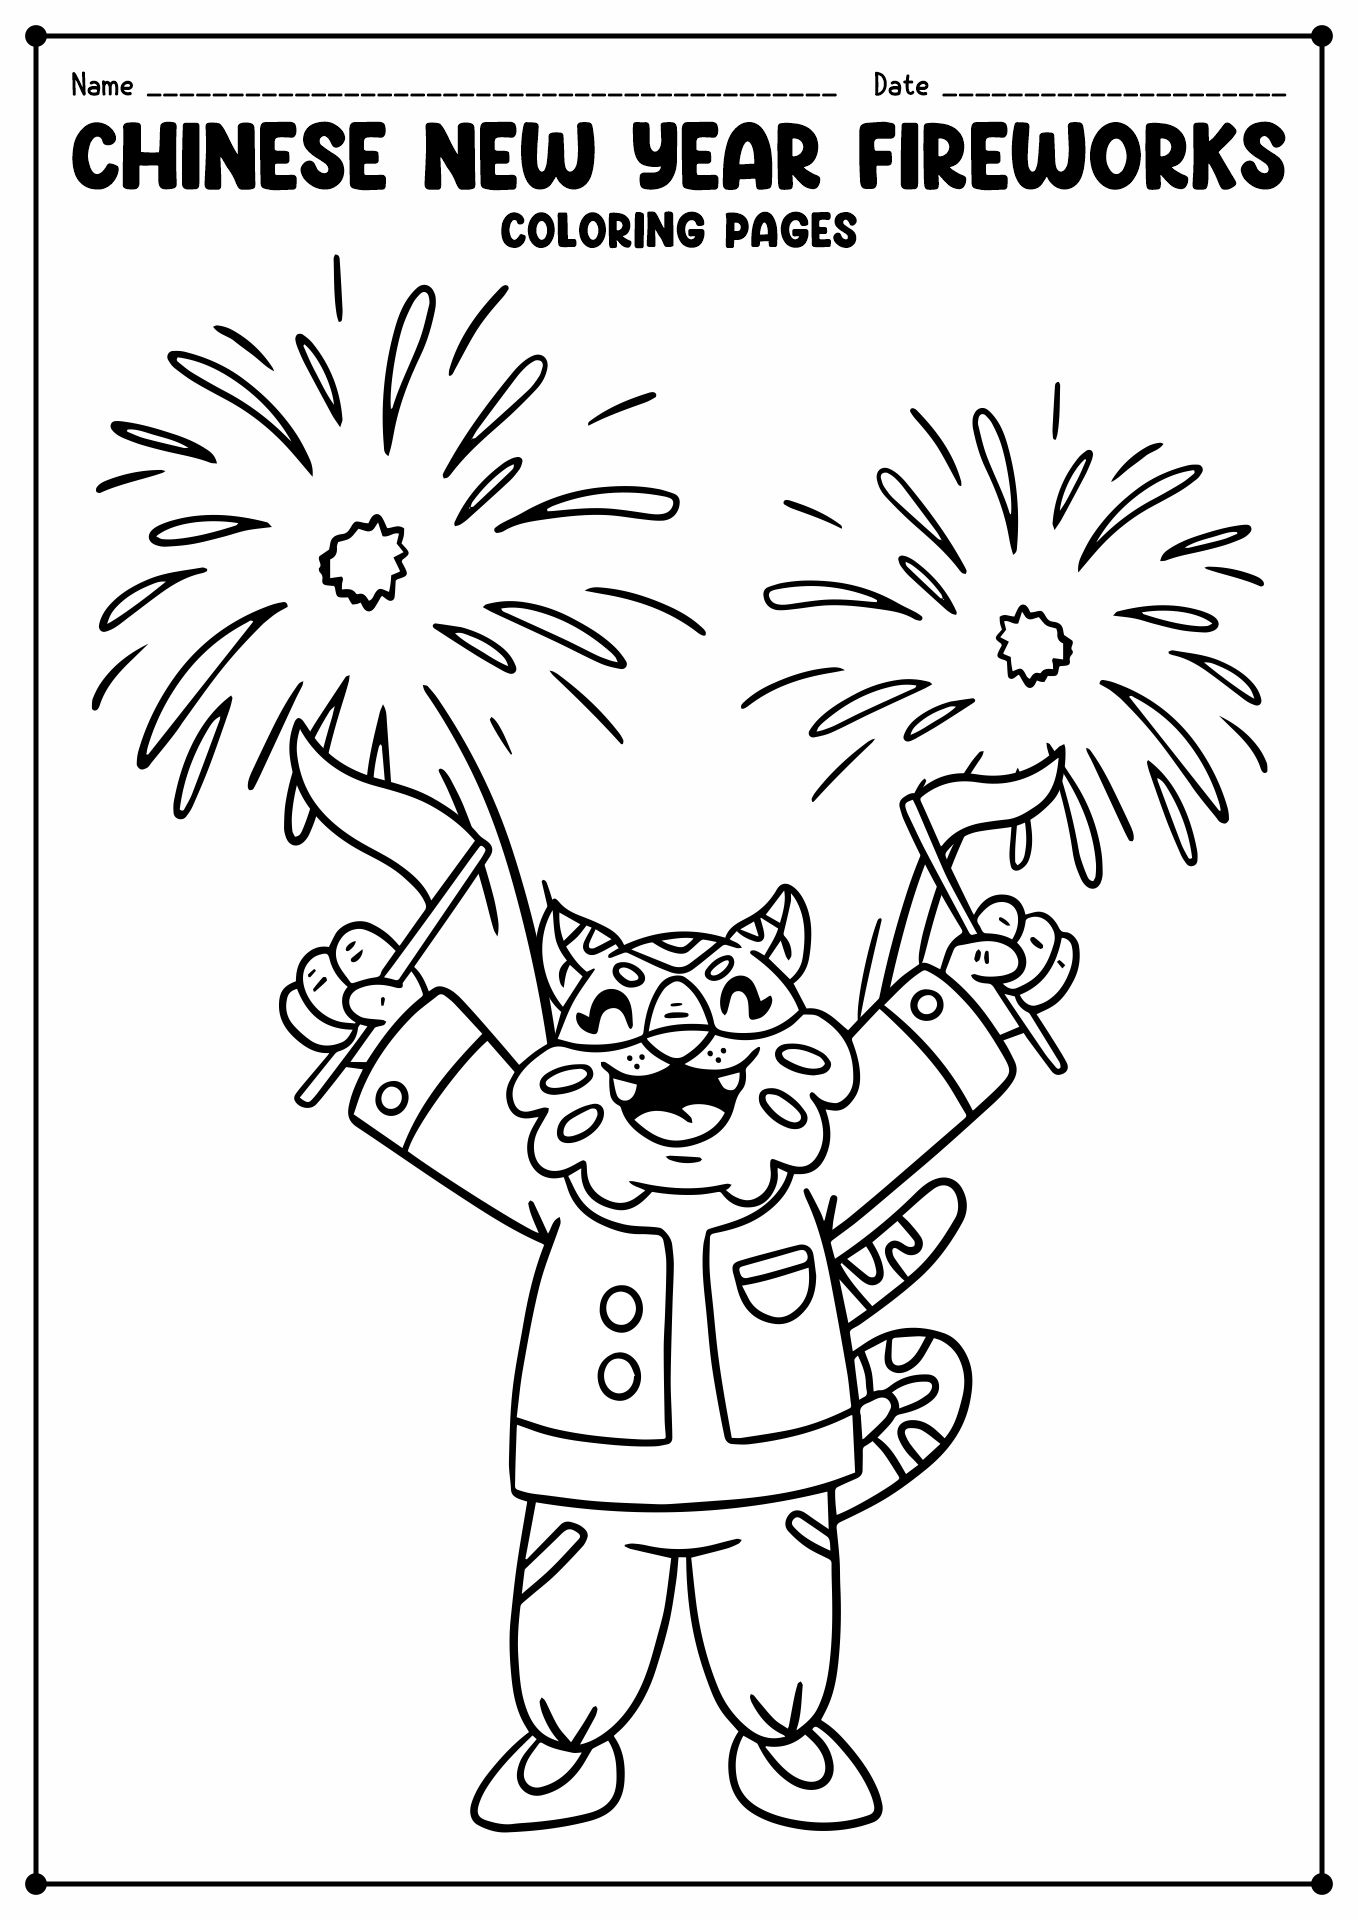 15-best-images-of-chinese-new-year-printable-worksheets-for-kids